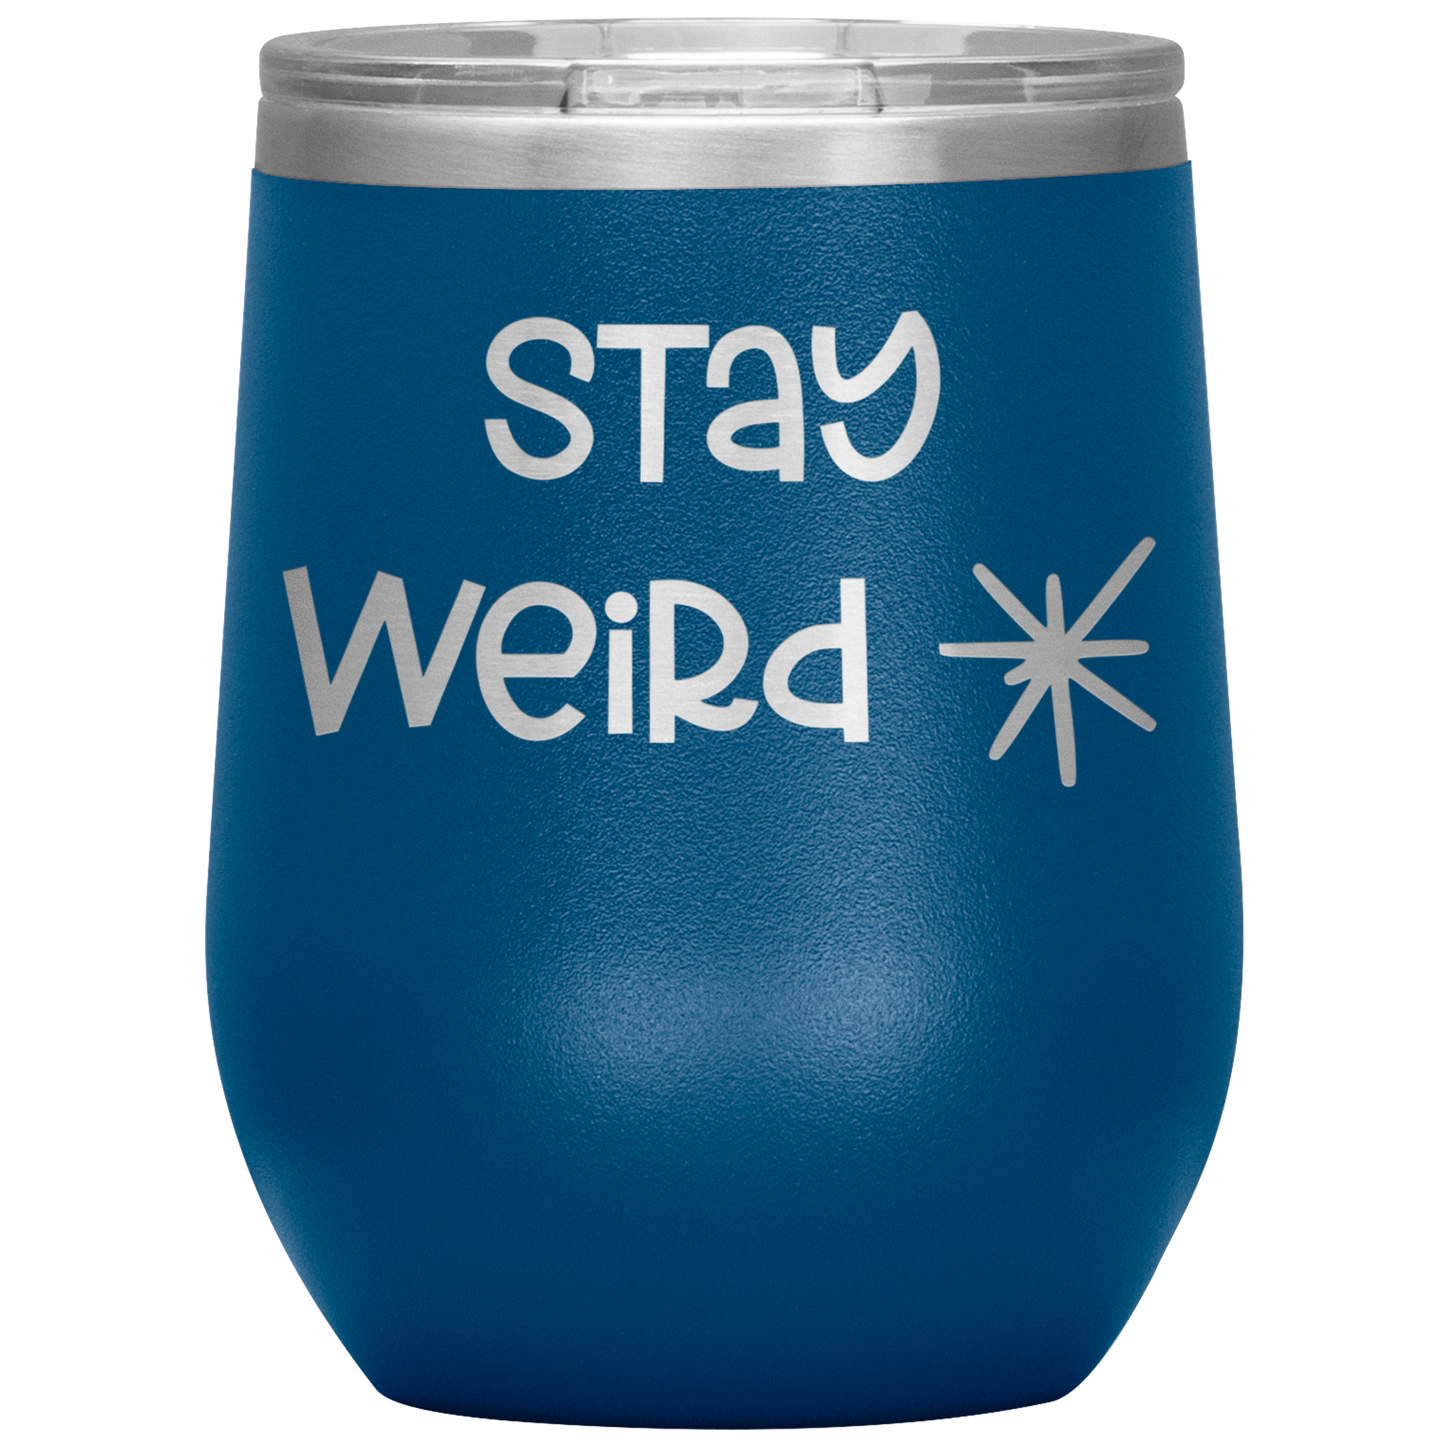 "Stay Weird" 12 oz. Insulated Stainless Steel Wine Tumbler with Lid